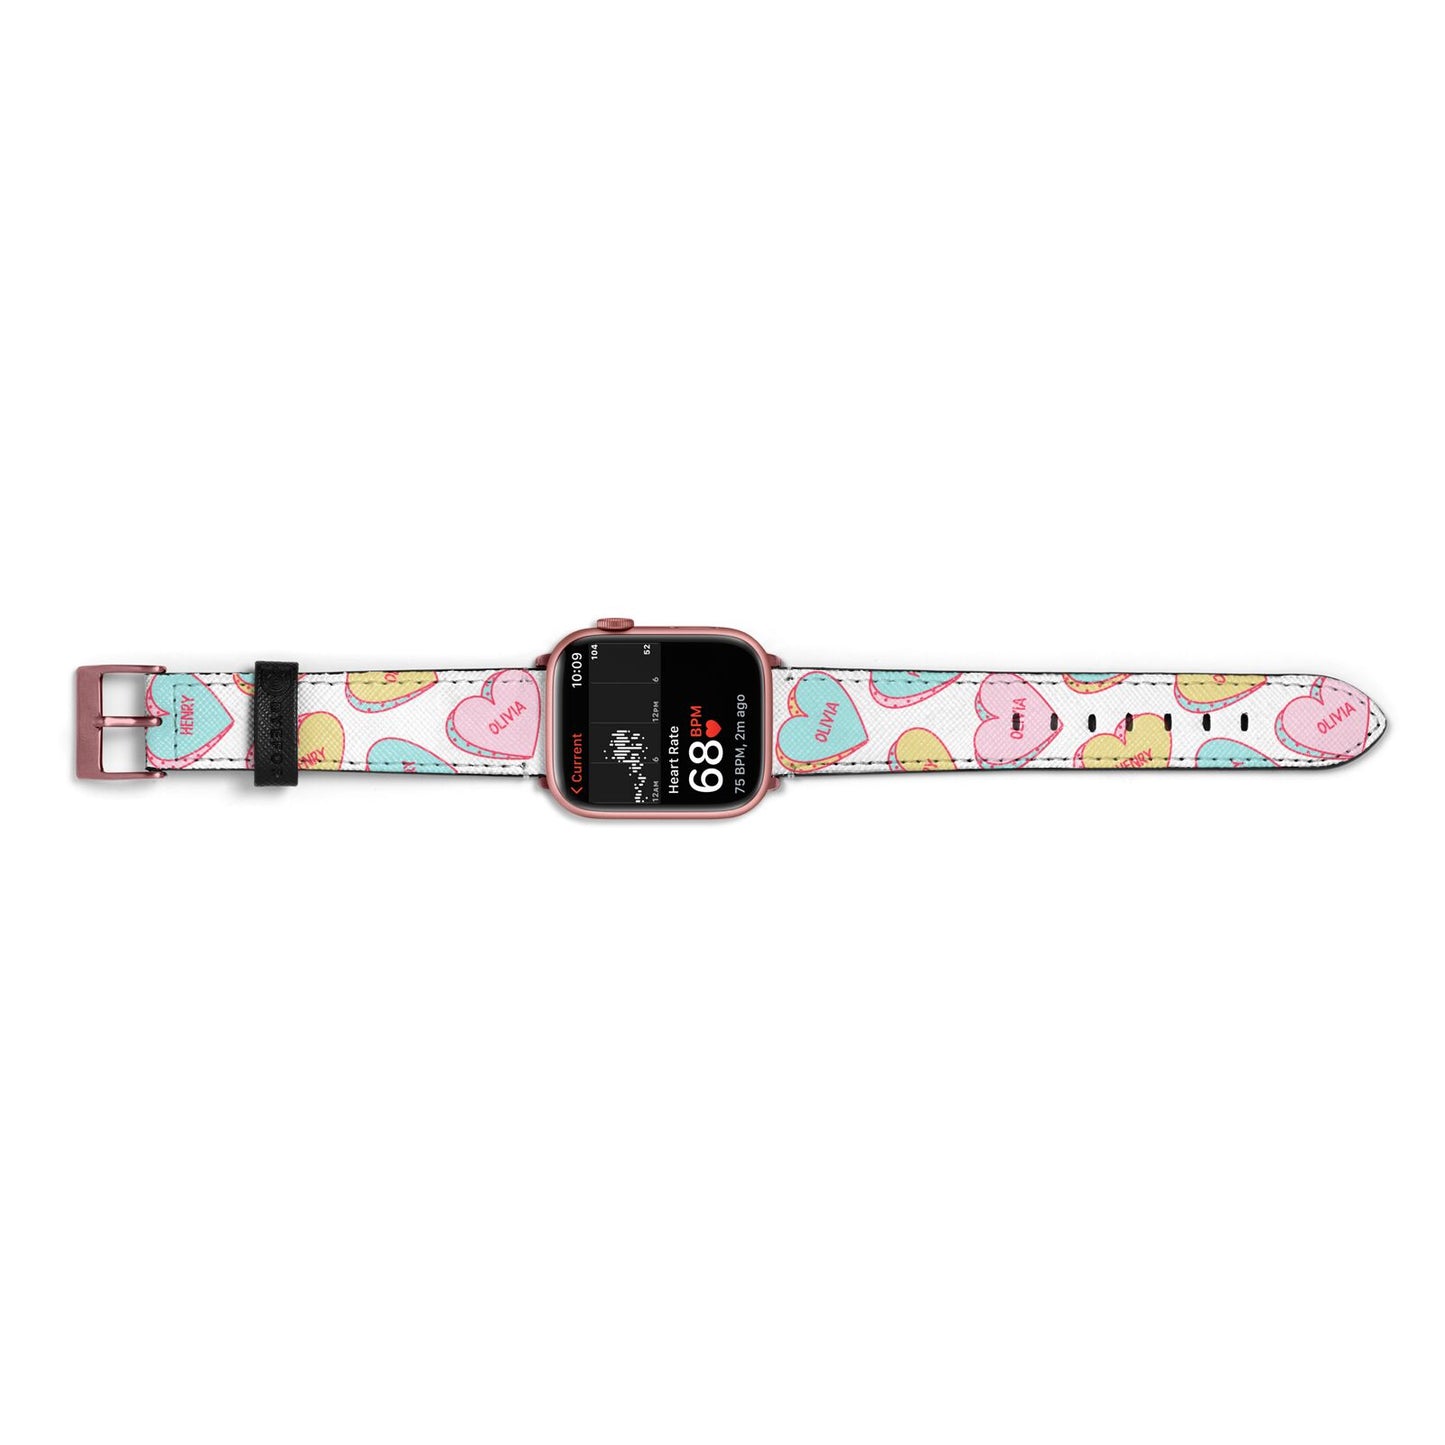 Personalised Heart Sweets Apple Watch Strap Size 38mm Landscape Image Rose Gold Hardware